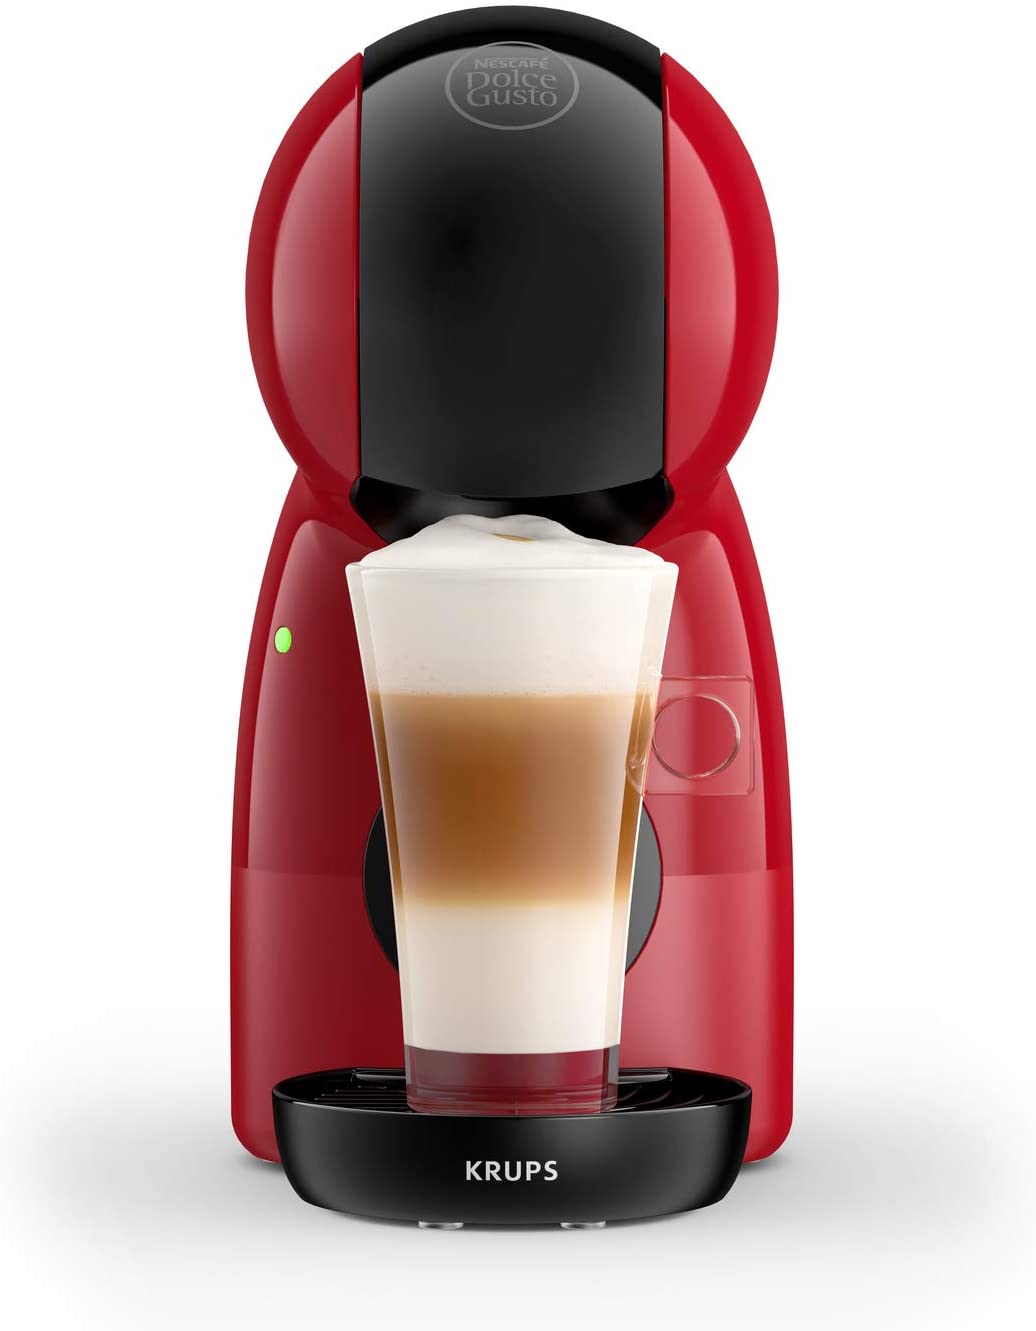 Krups Dolce Gusto Krups Nescafé Dolce Gusto Piccolo XS red, ultra-compact coffee machine, pad coffee machine, multidrinks, intuitive, pressure 15 bar, eco mode KP1A3510